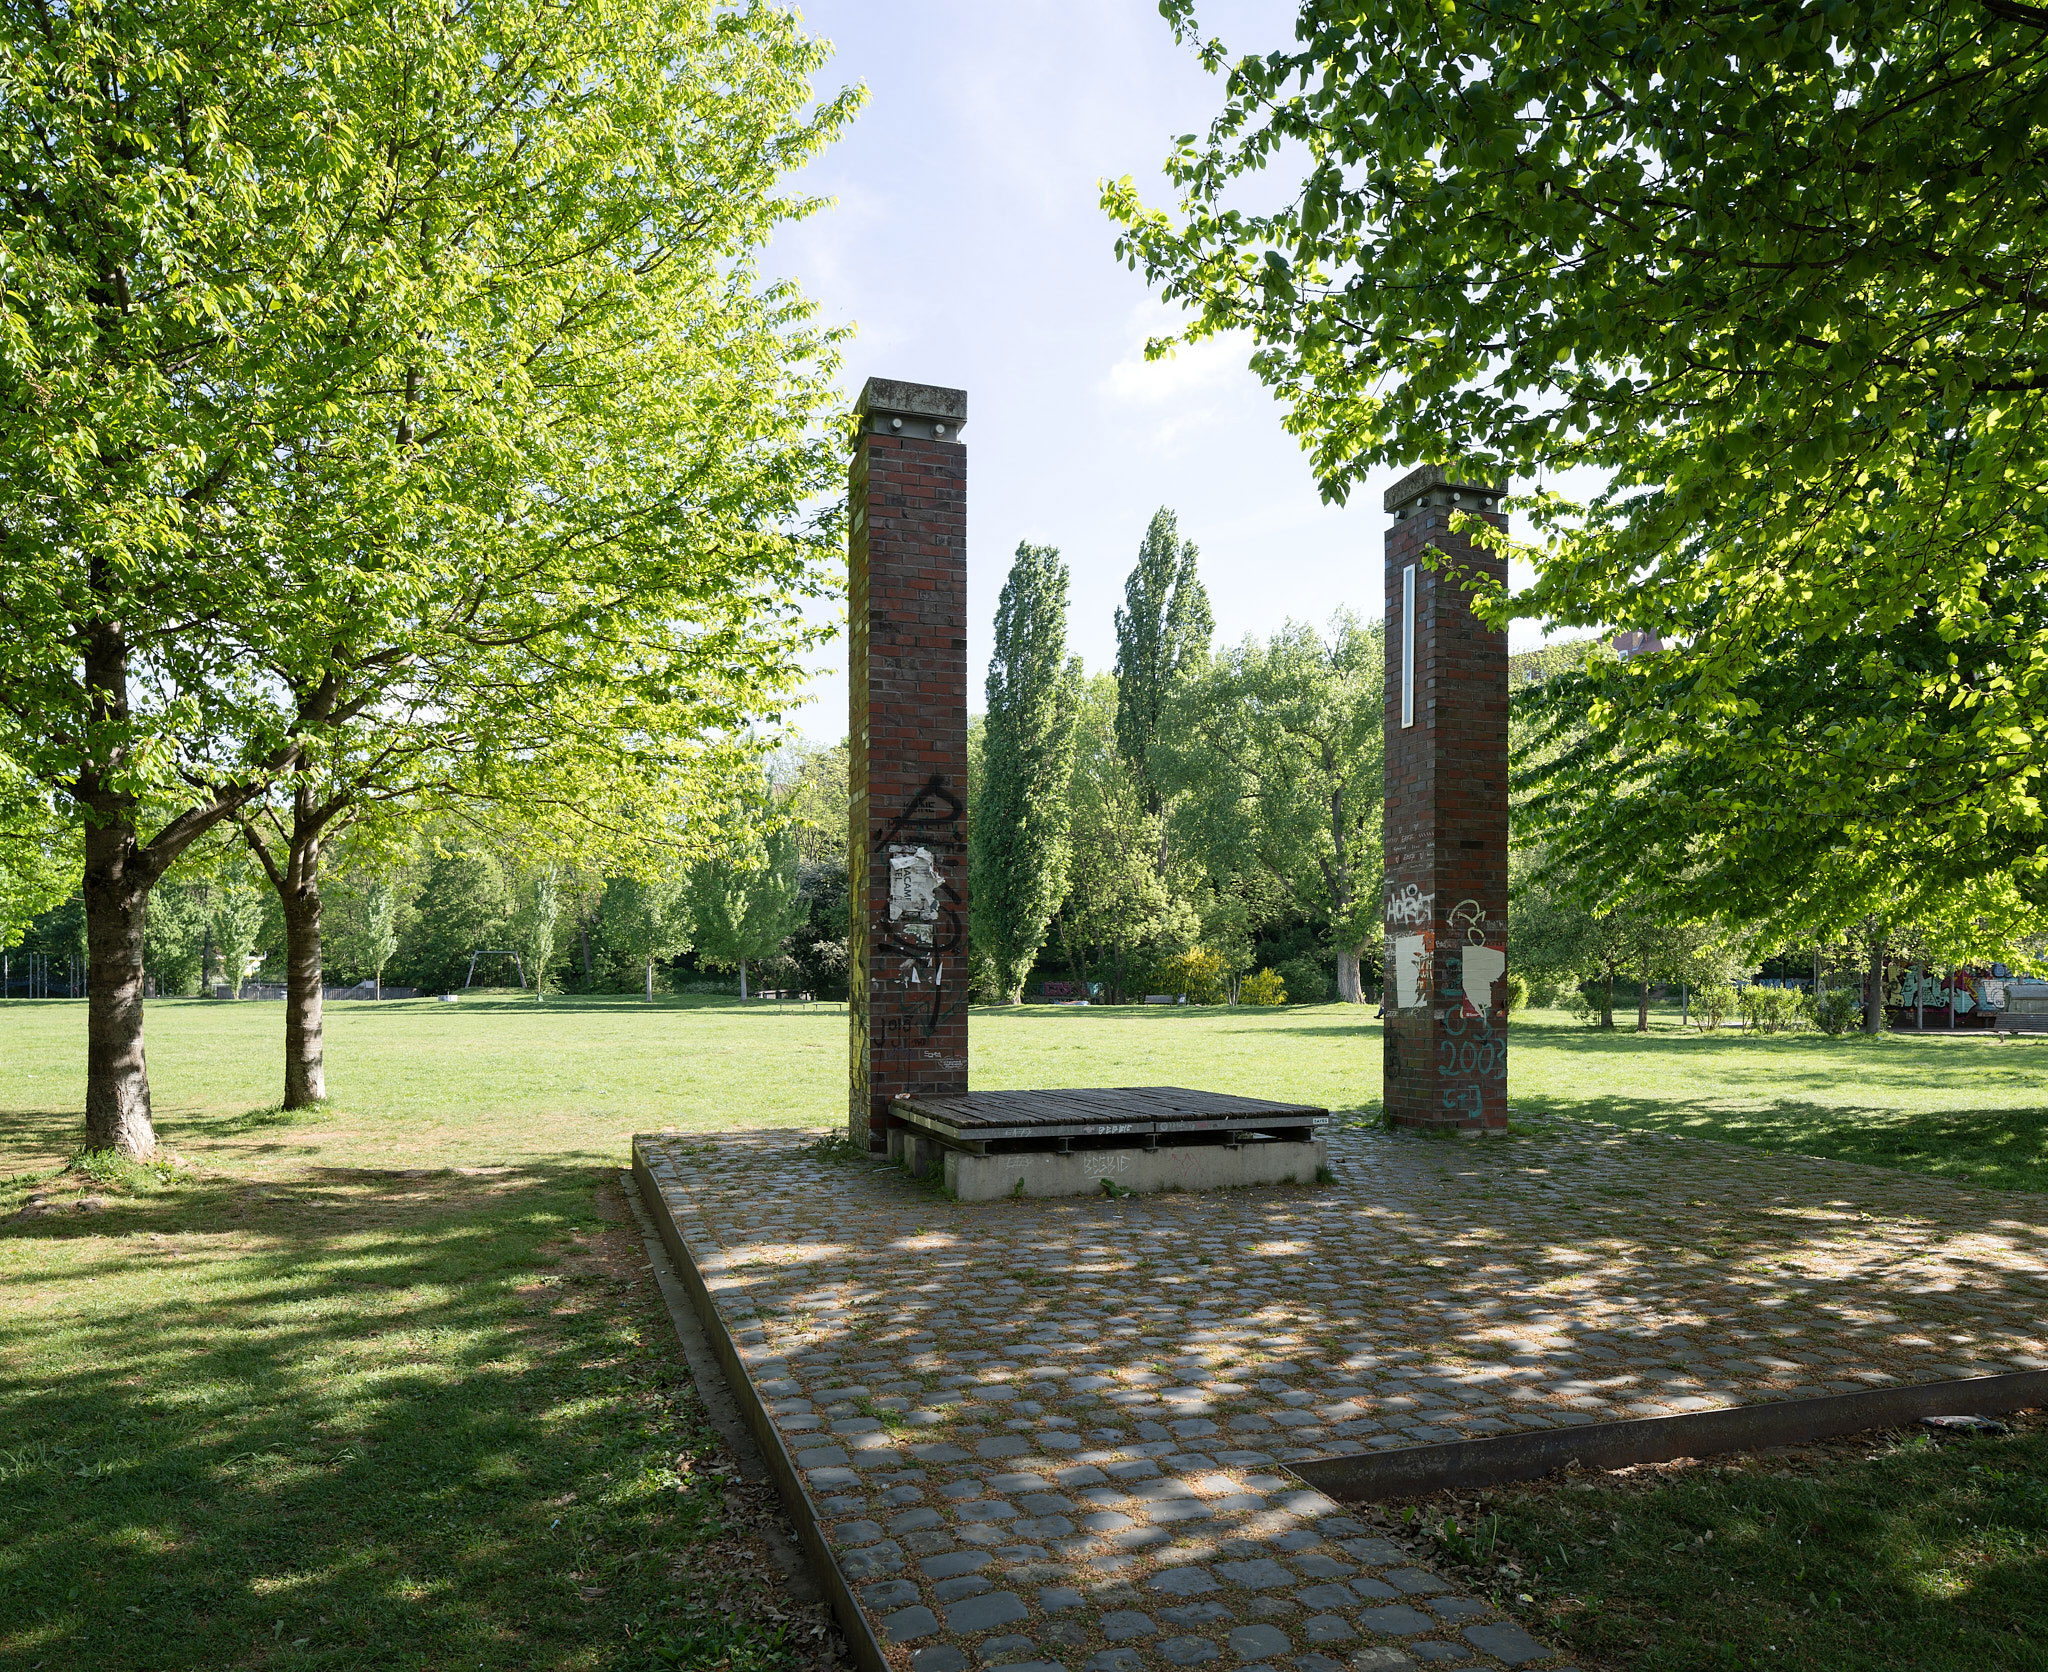 The photo shows the Nordstadtpark. Trees are standing on a green lawn. In the middle you can see a paved square with two pillars made of bricks.